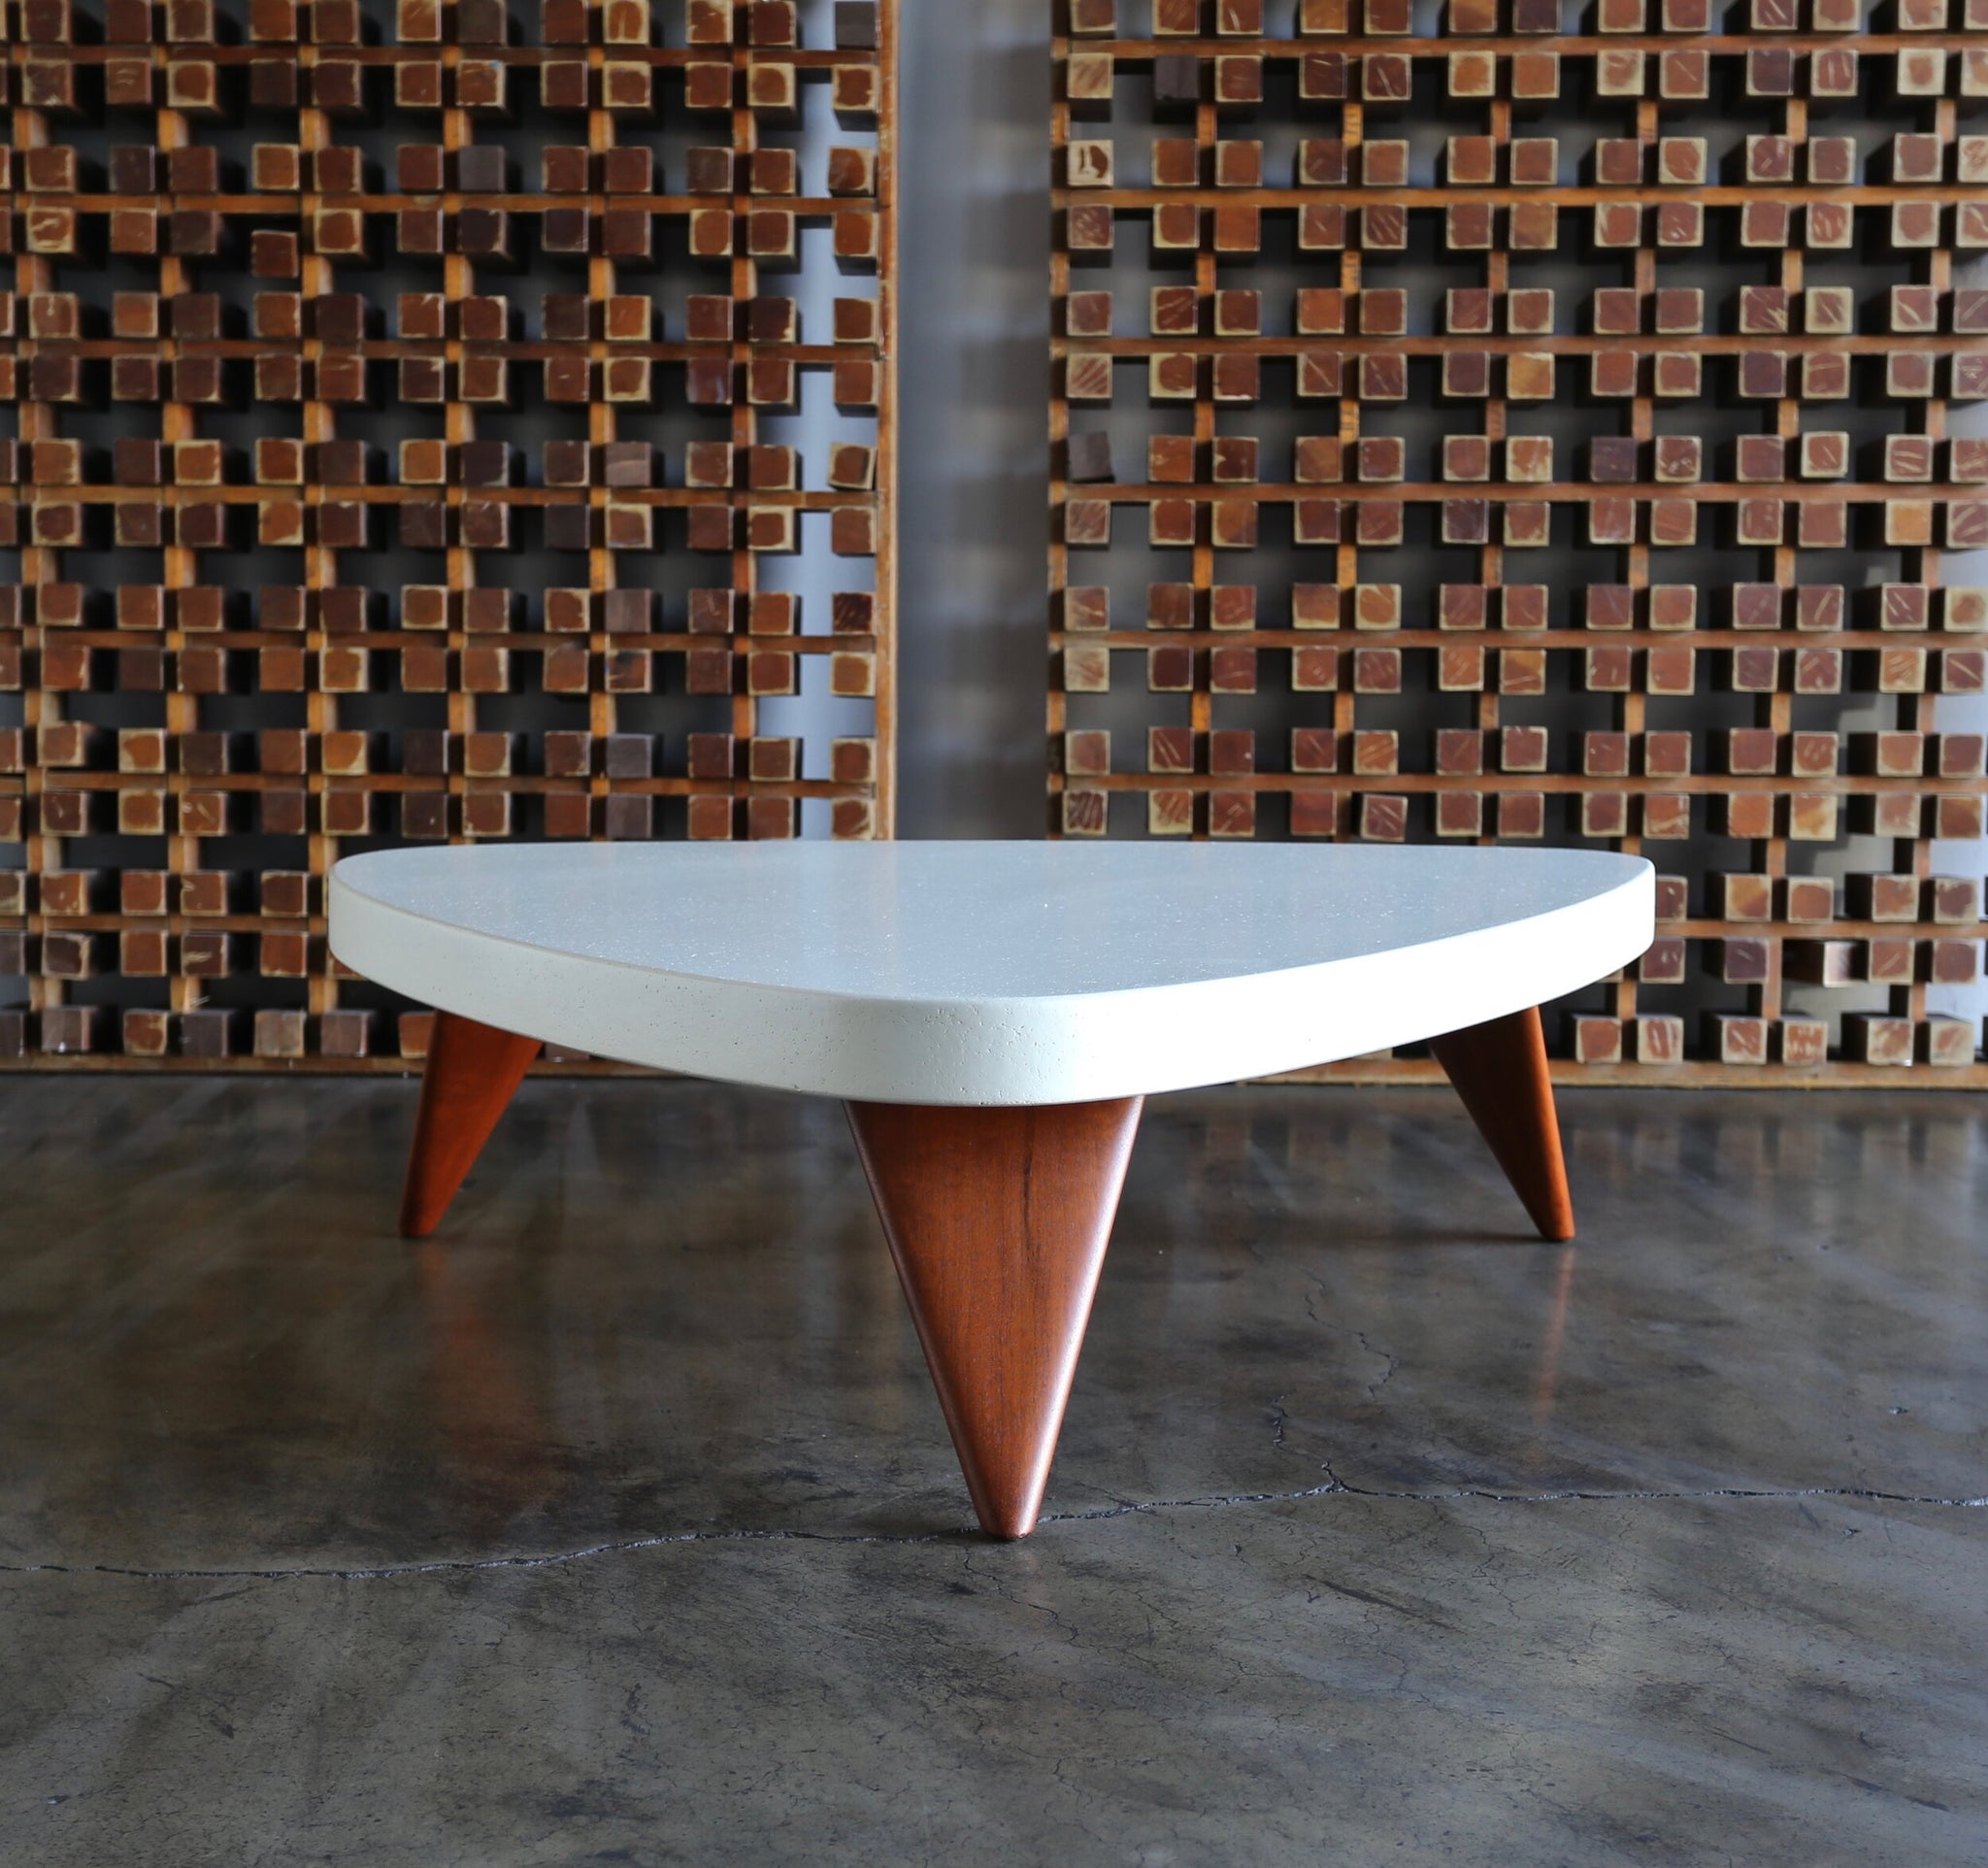 = SOLD = Paul Frankl Cork Top Coffee Table for Johnson Furniture circa 1955